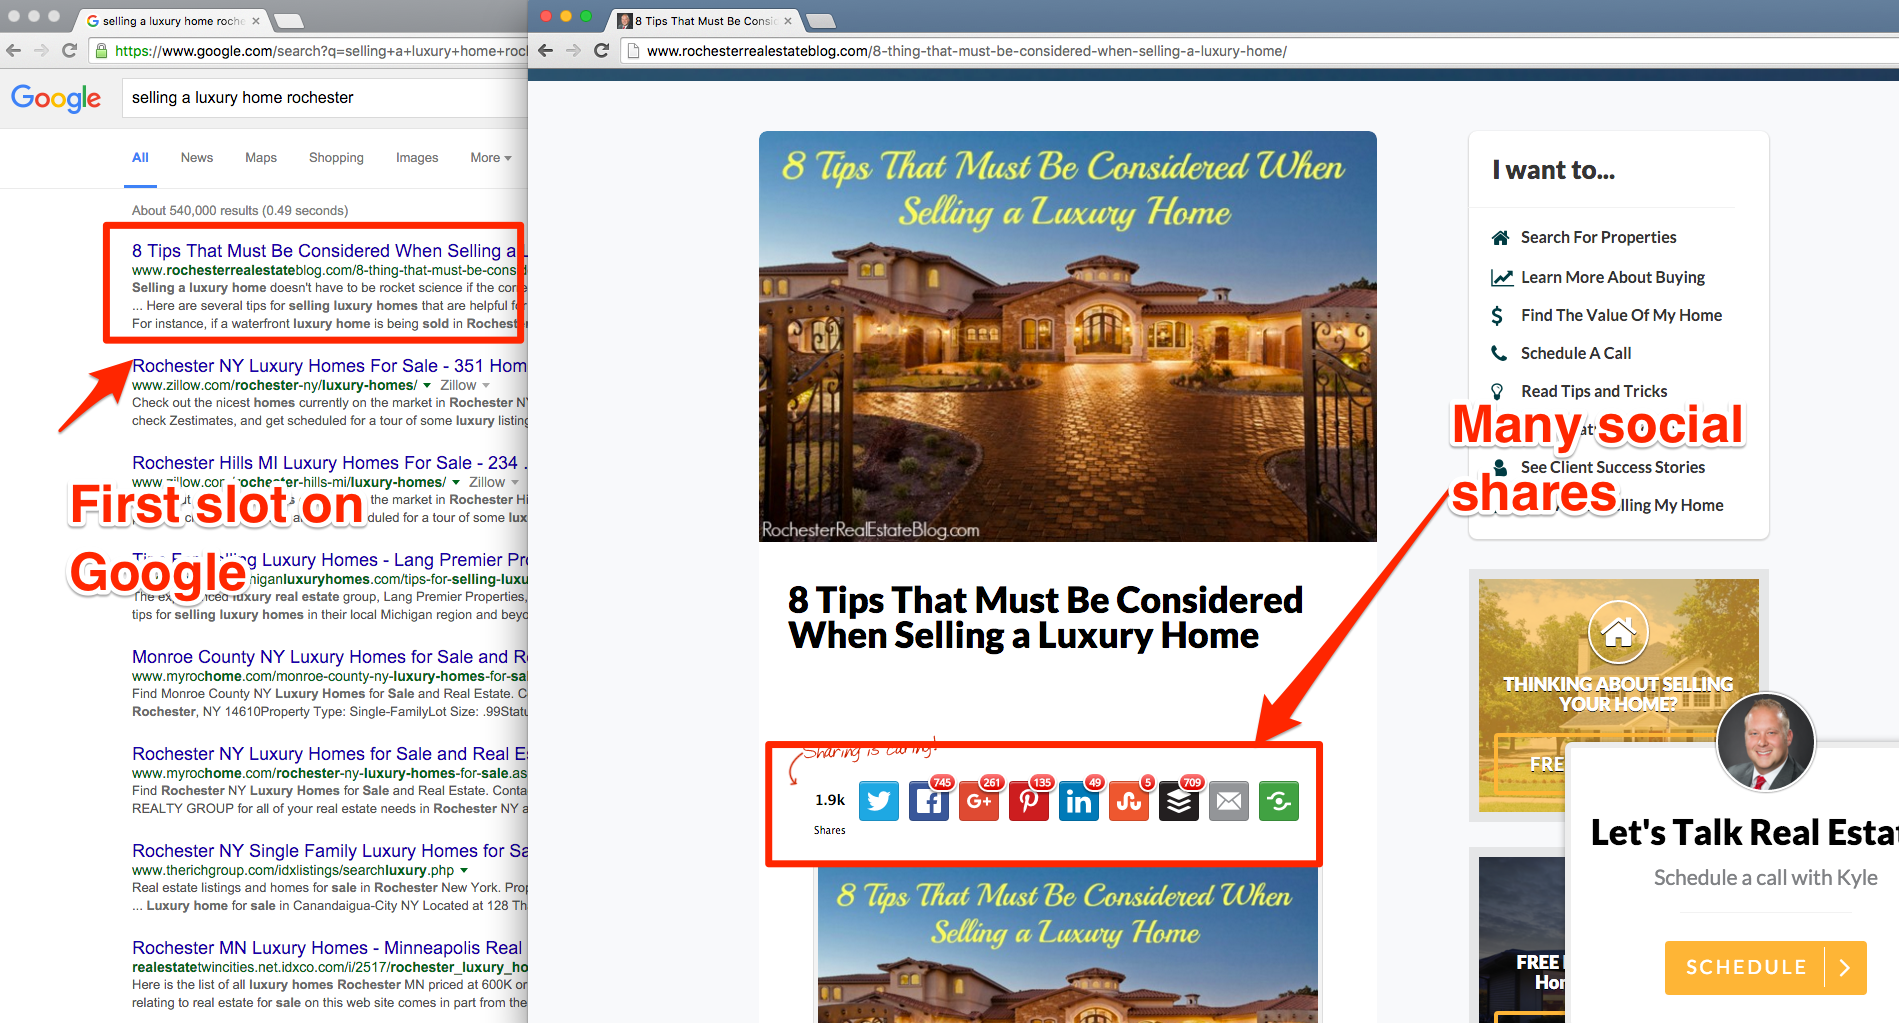 8_Tips_That_Must_Be_Considered_When_Selling_a_Luxury_Home_and_selling_a_luxury_home_rochester_-_Google_Search